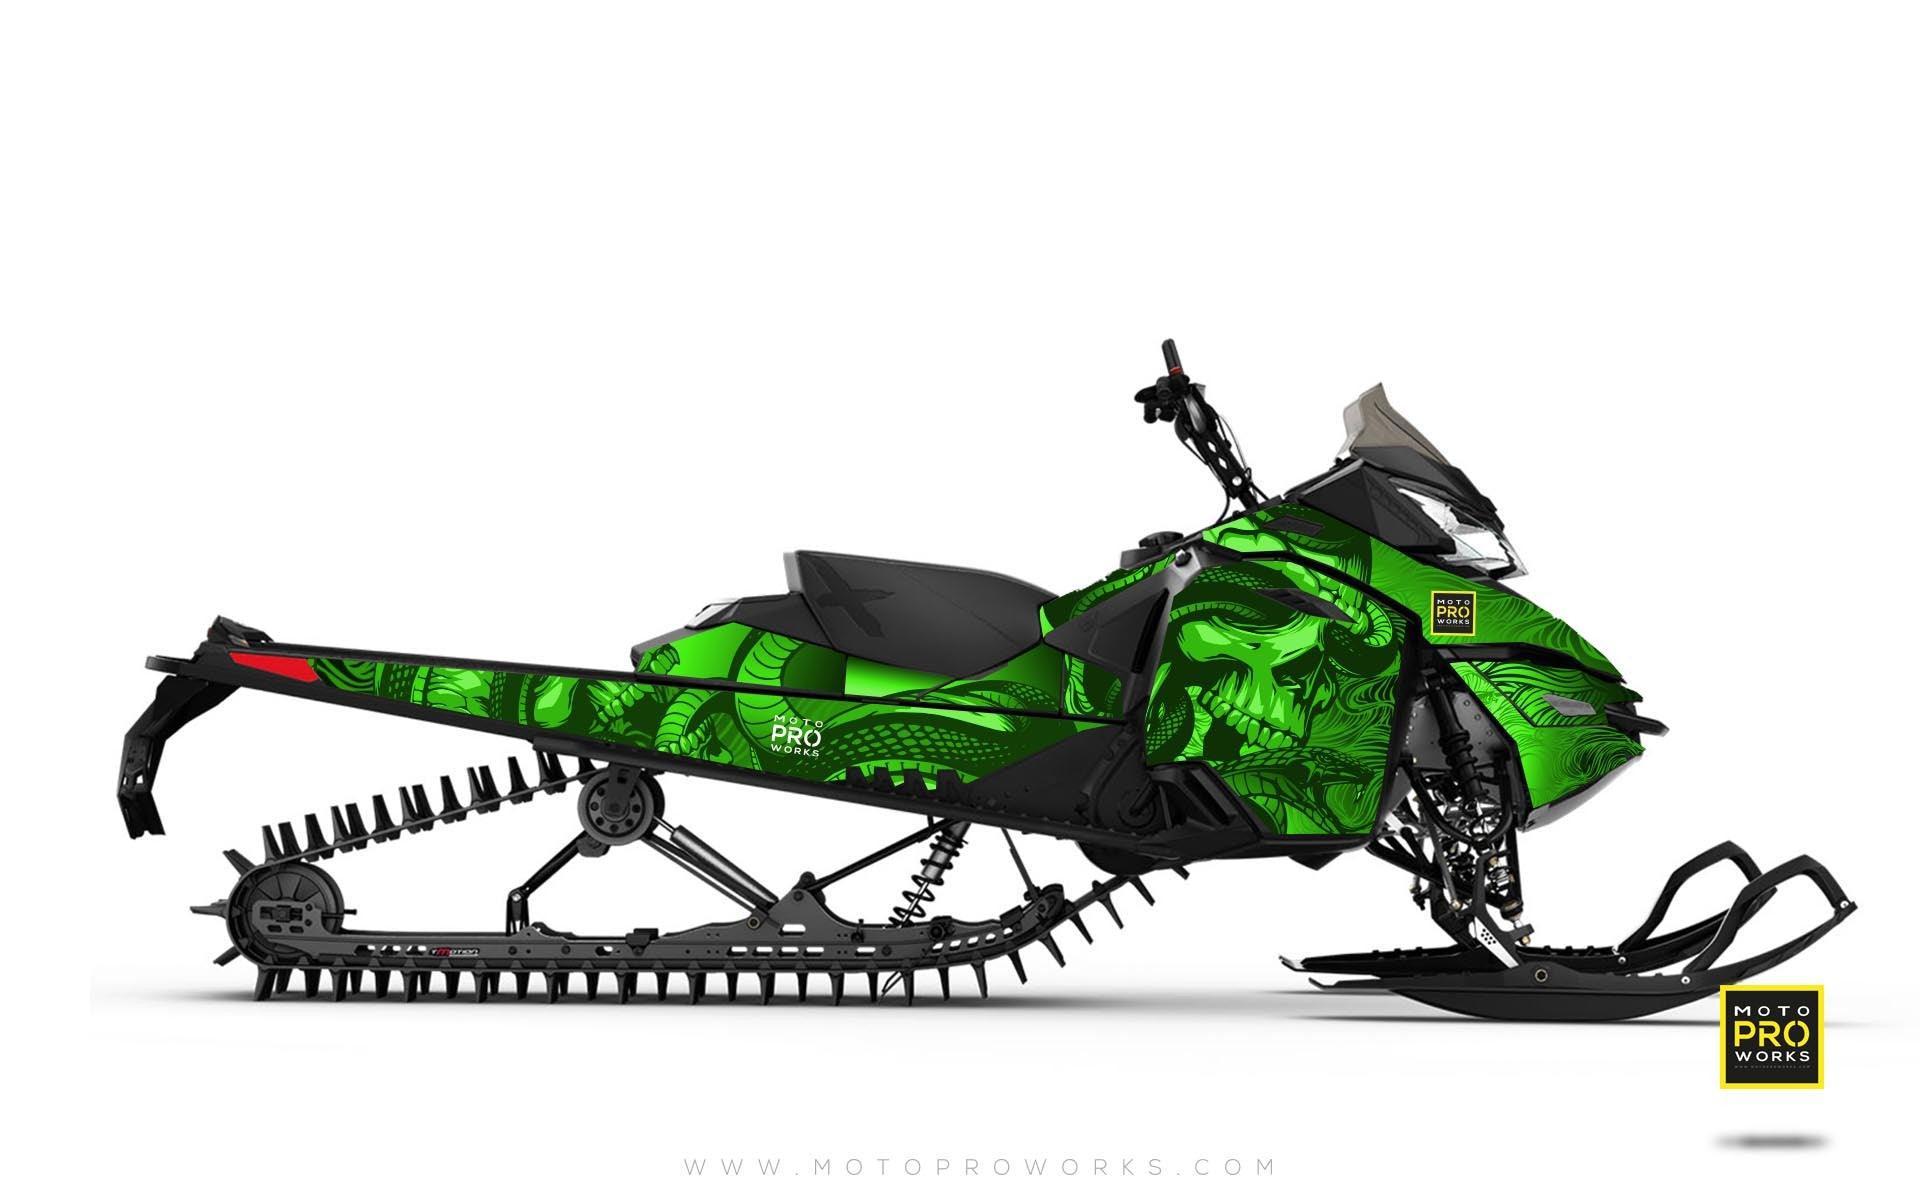 Ski-Doo Graphics - "Ssskully" (green) - MotoProWorks | Decals and Bike Graphic kit